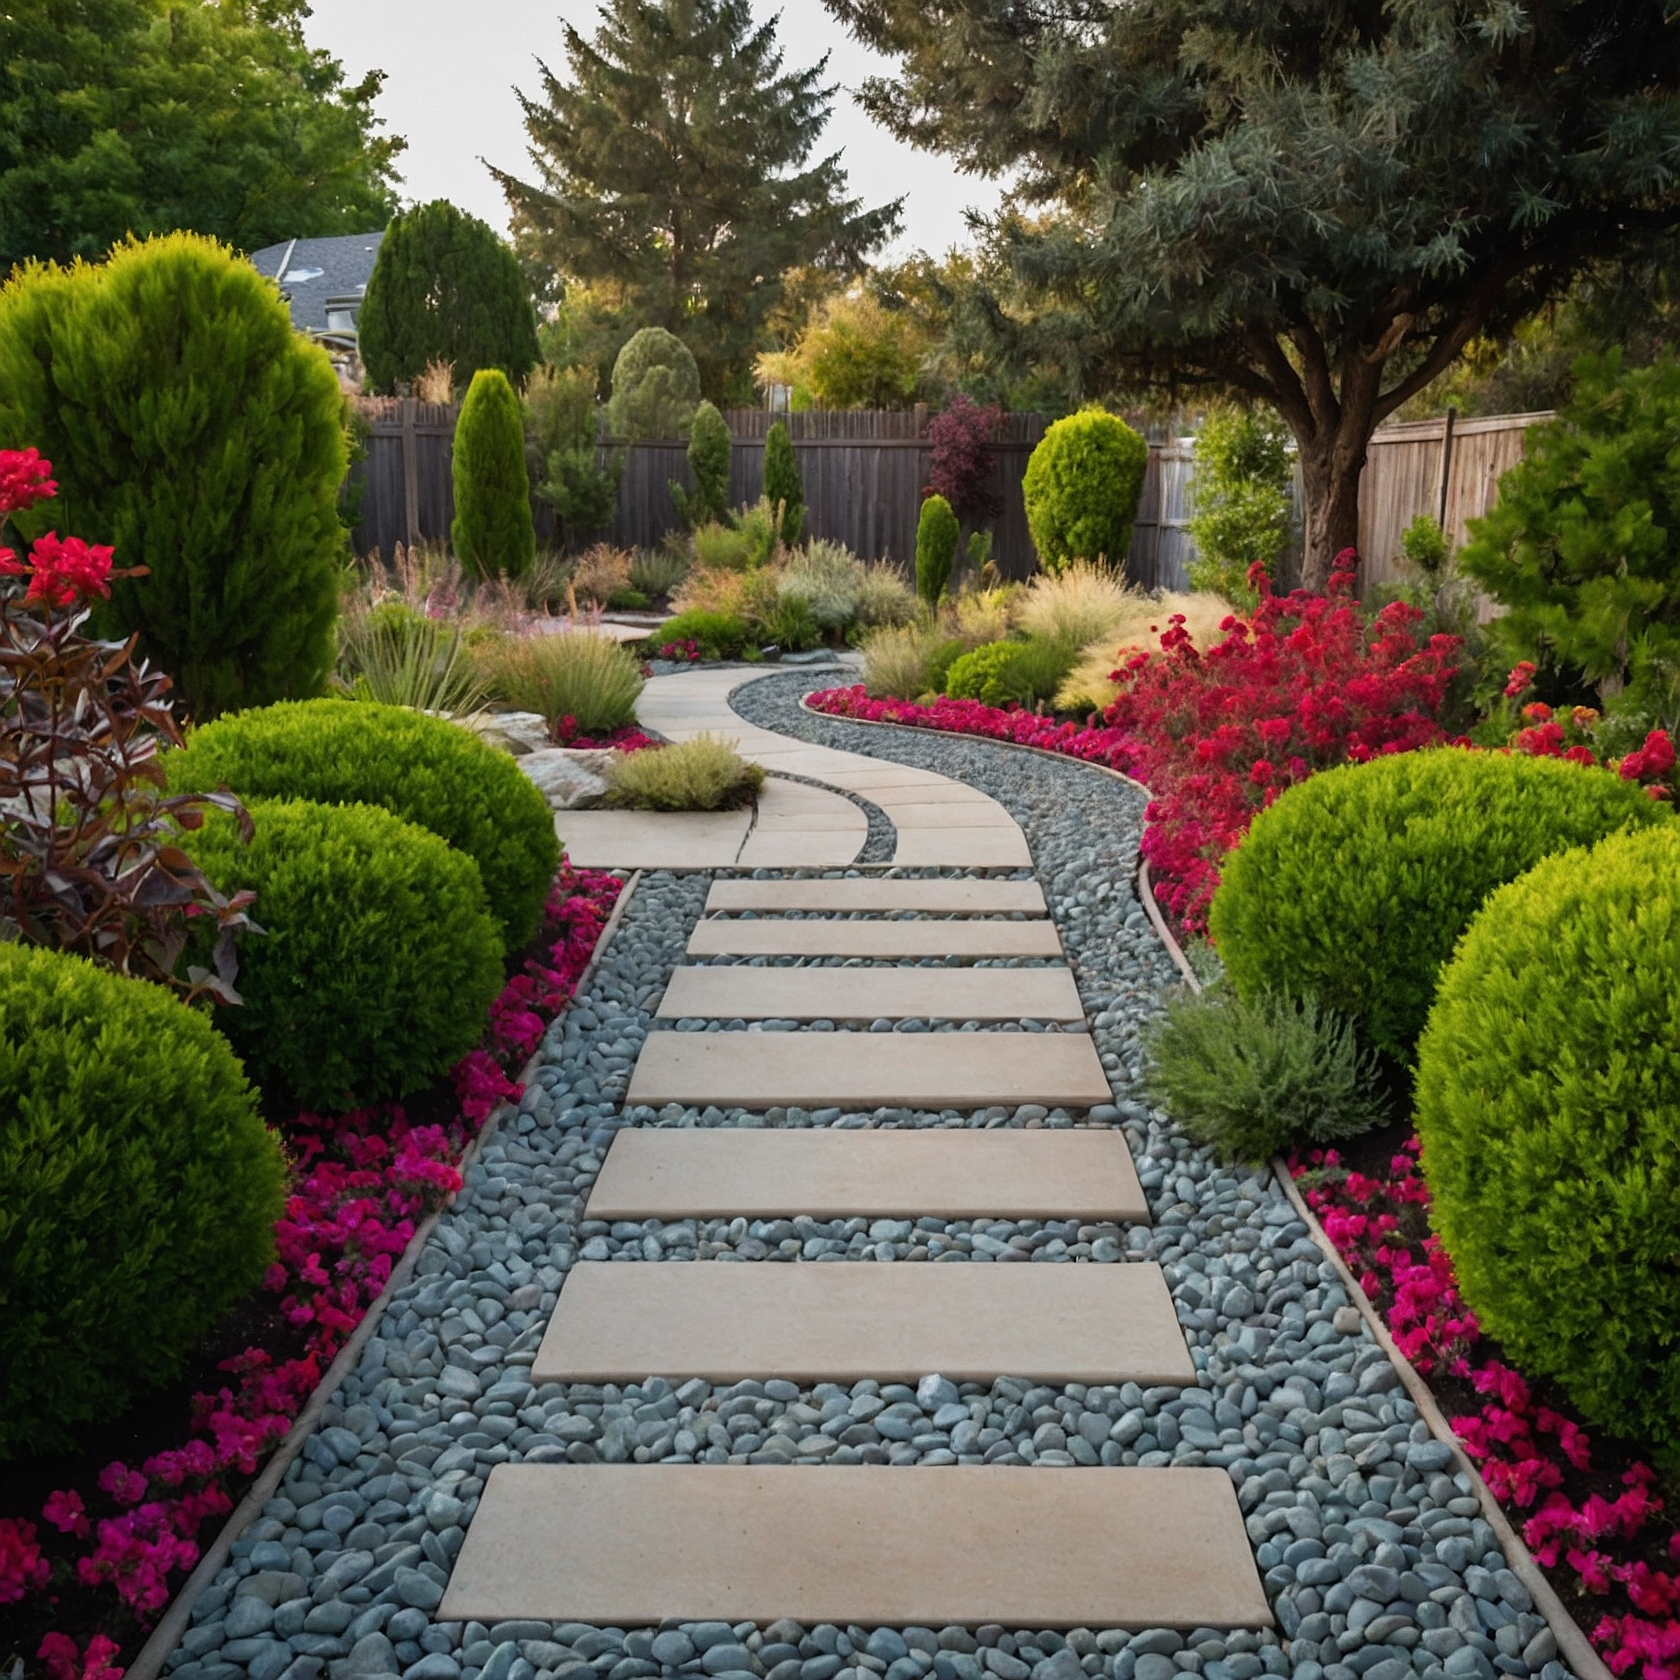 GRavel And Stepping Stone Pathway with Bushes And Trees